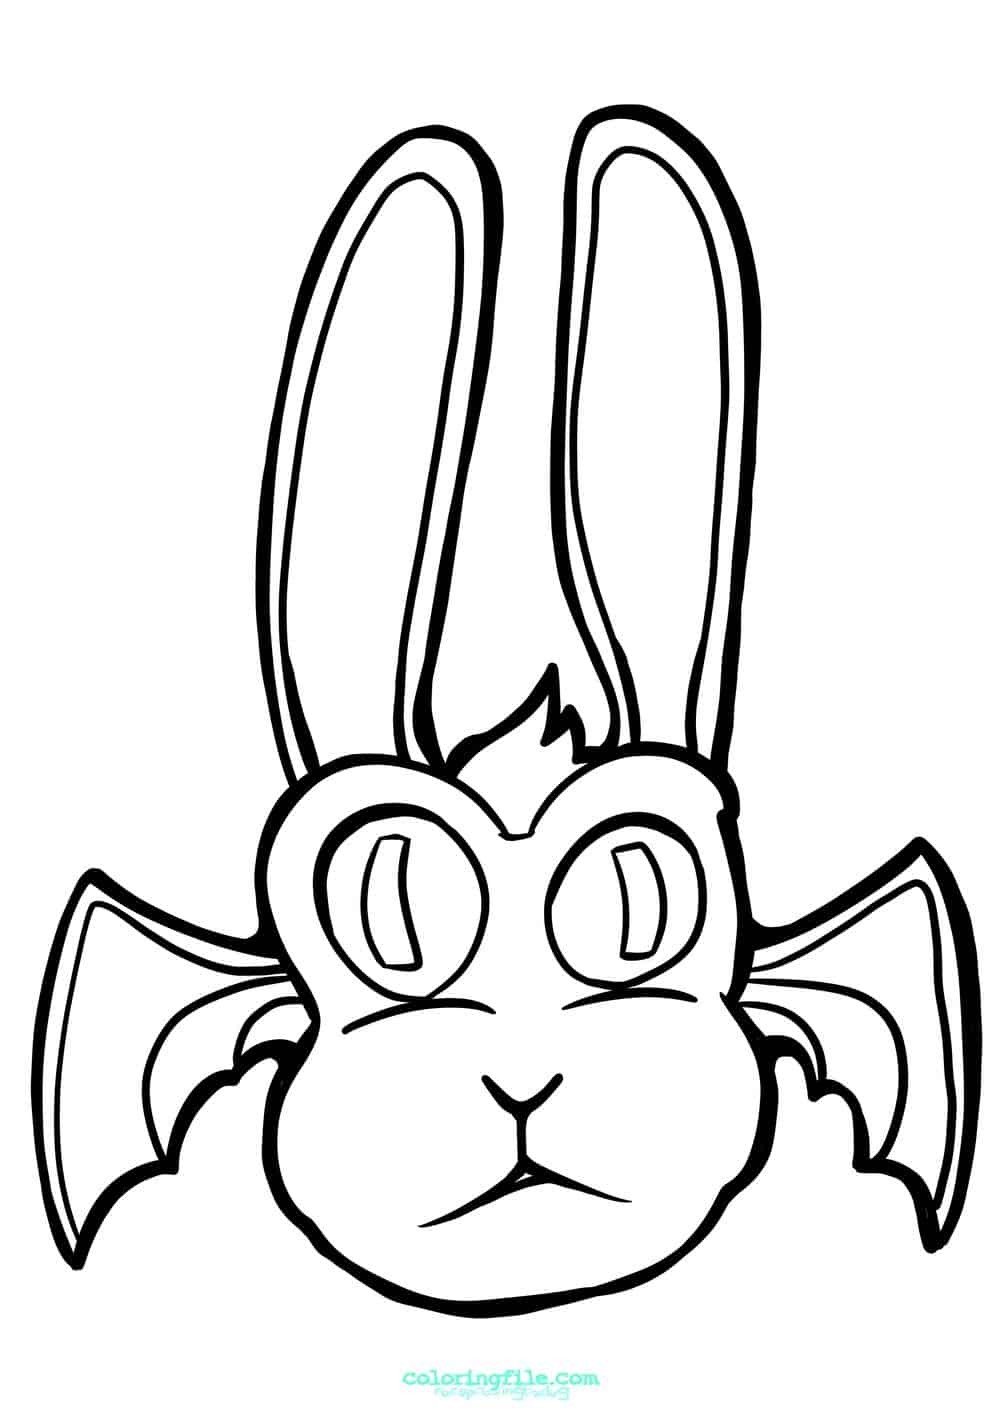 Funny halloween bat coloring pages